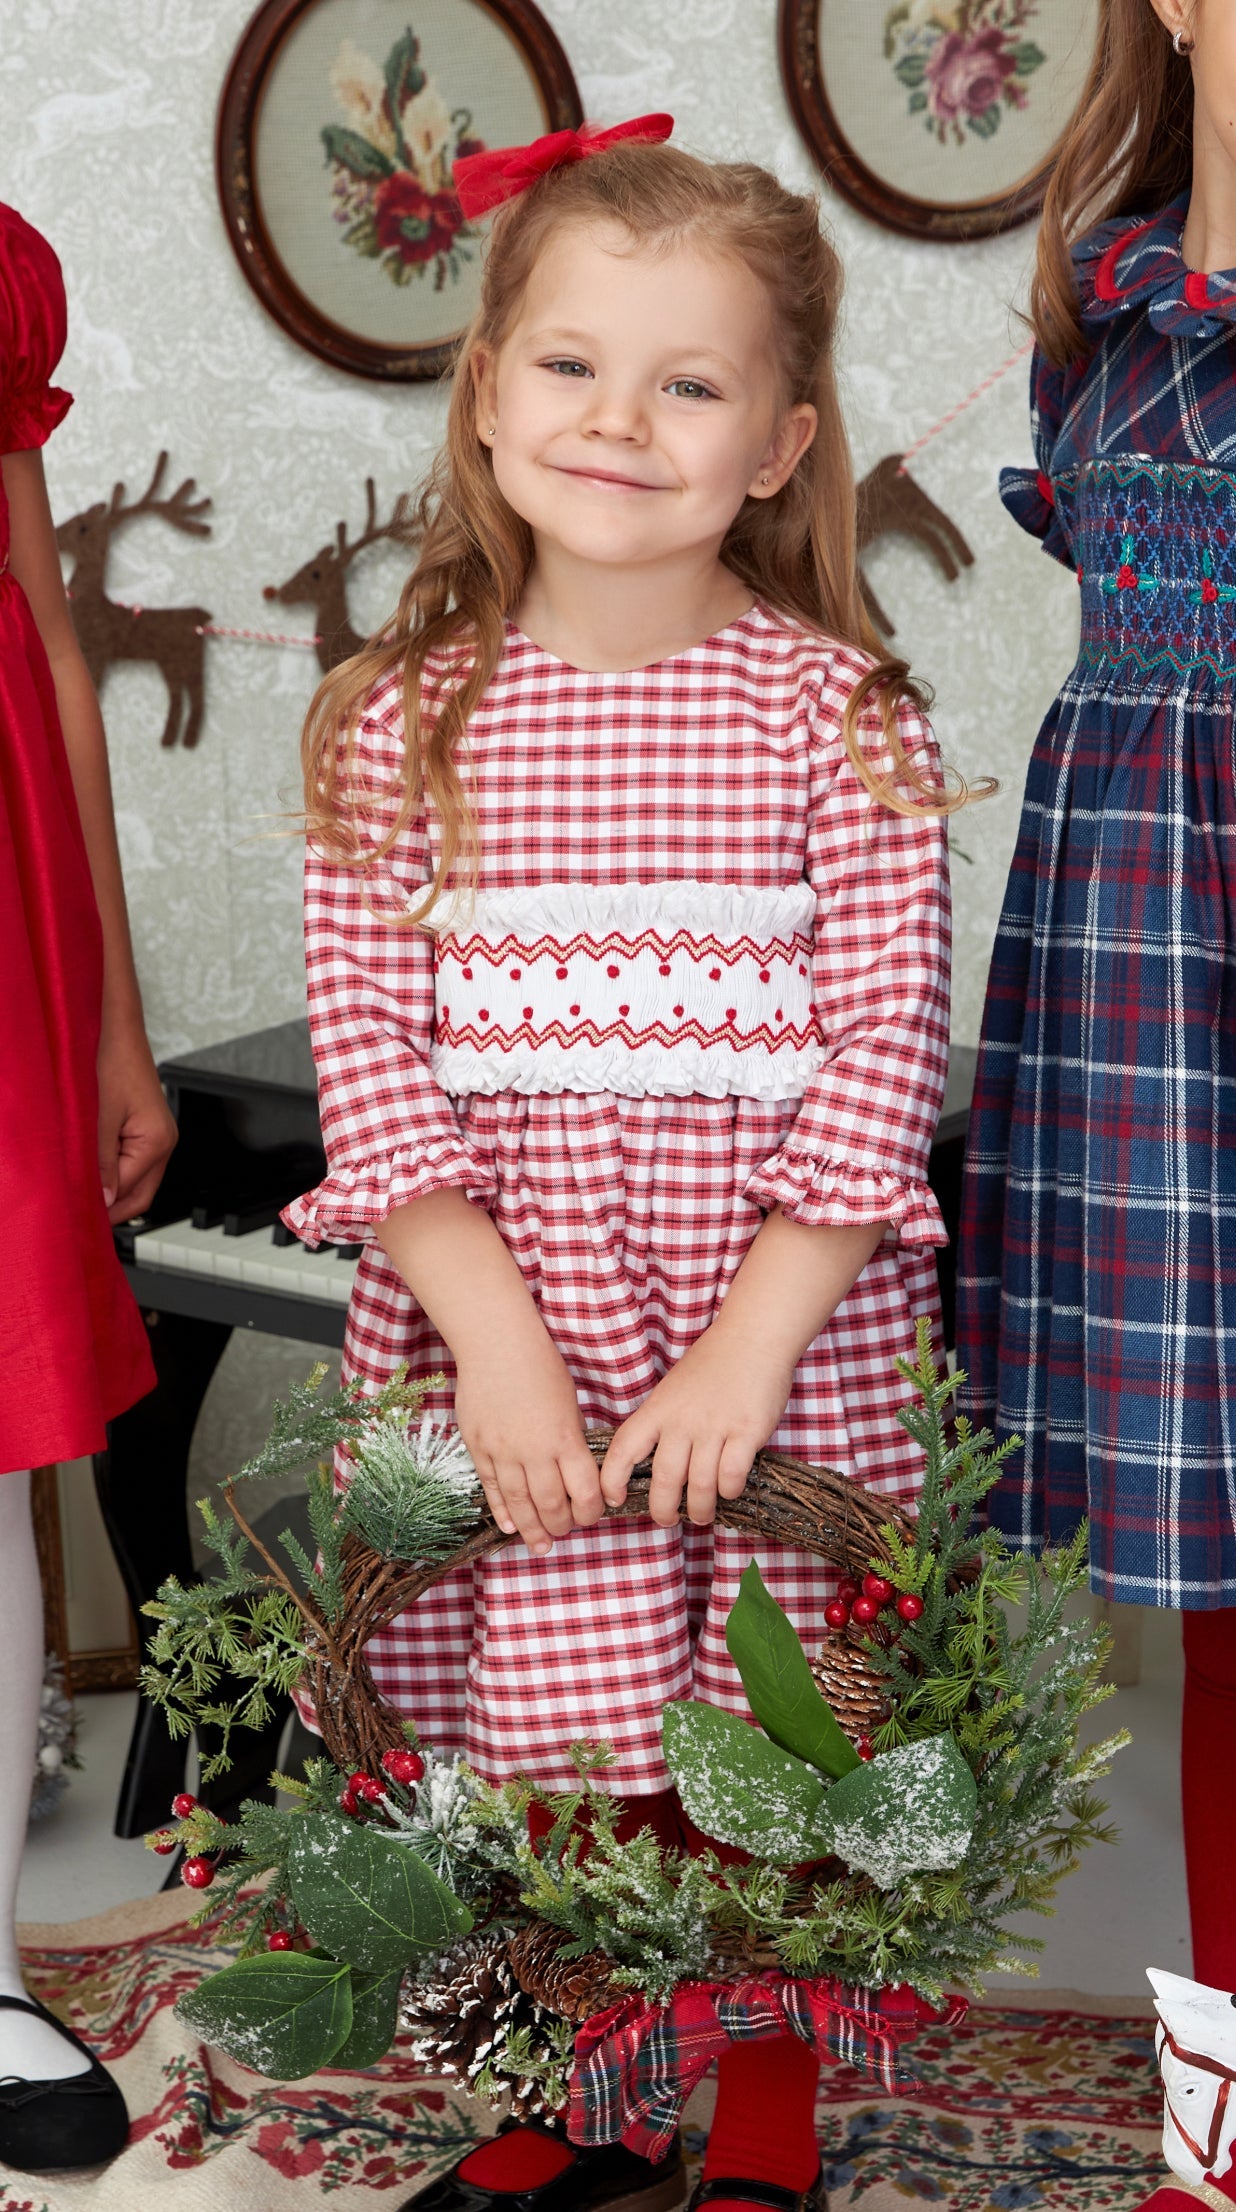 ** SECONDS SALE ** The hand smocked OPHELIA dress - Red and white